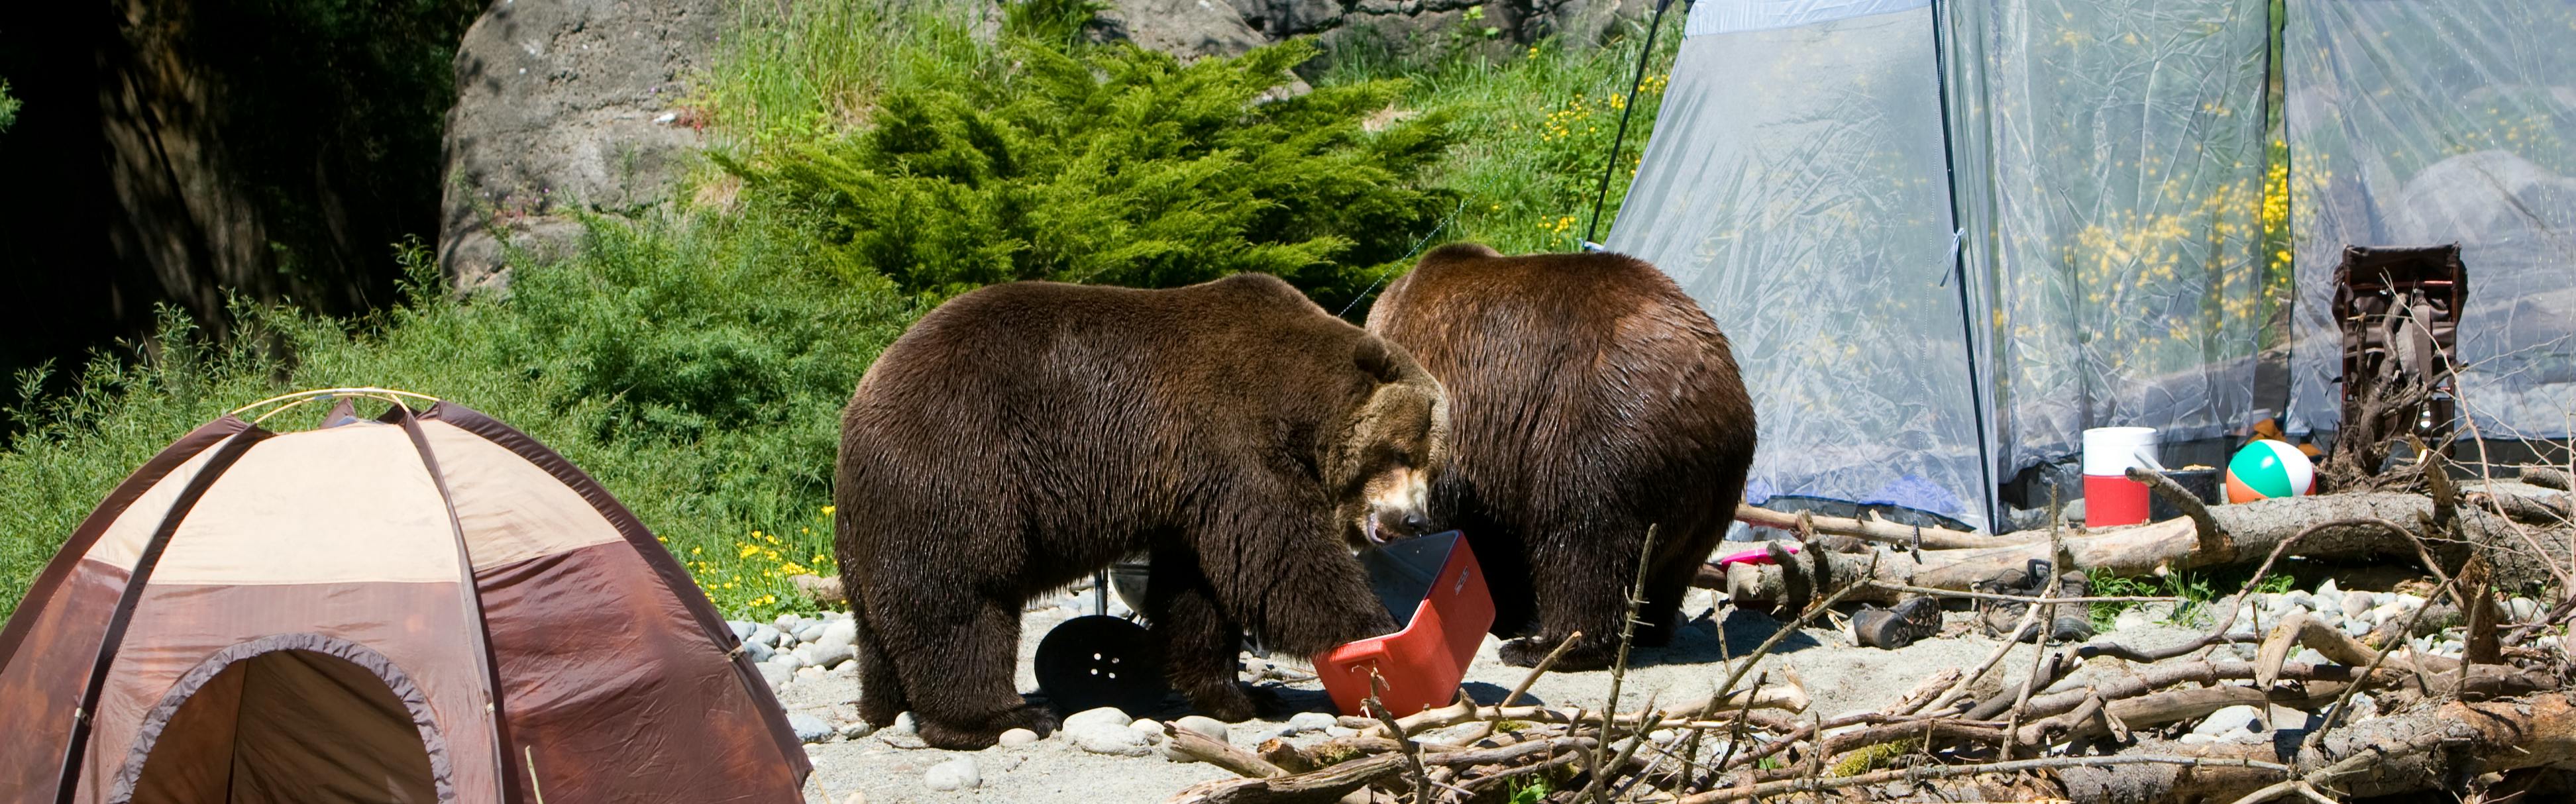 How to Store Your Food So You Don't Get Eaten By A Bear